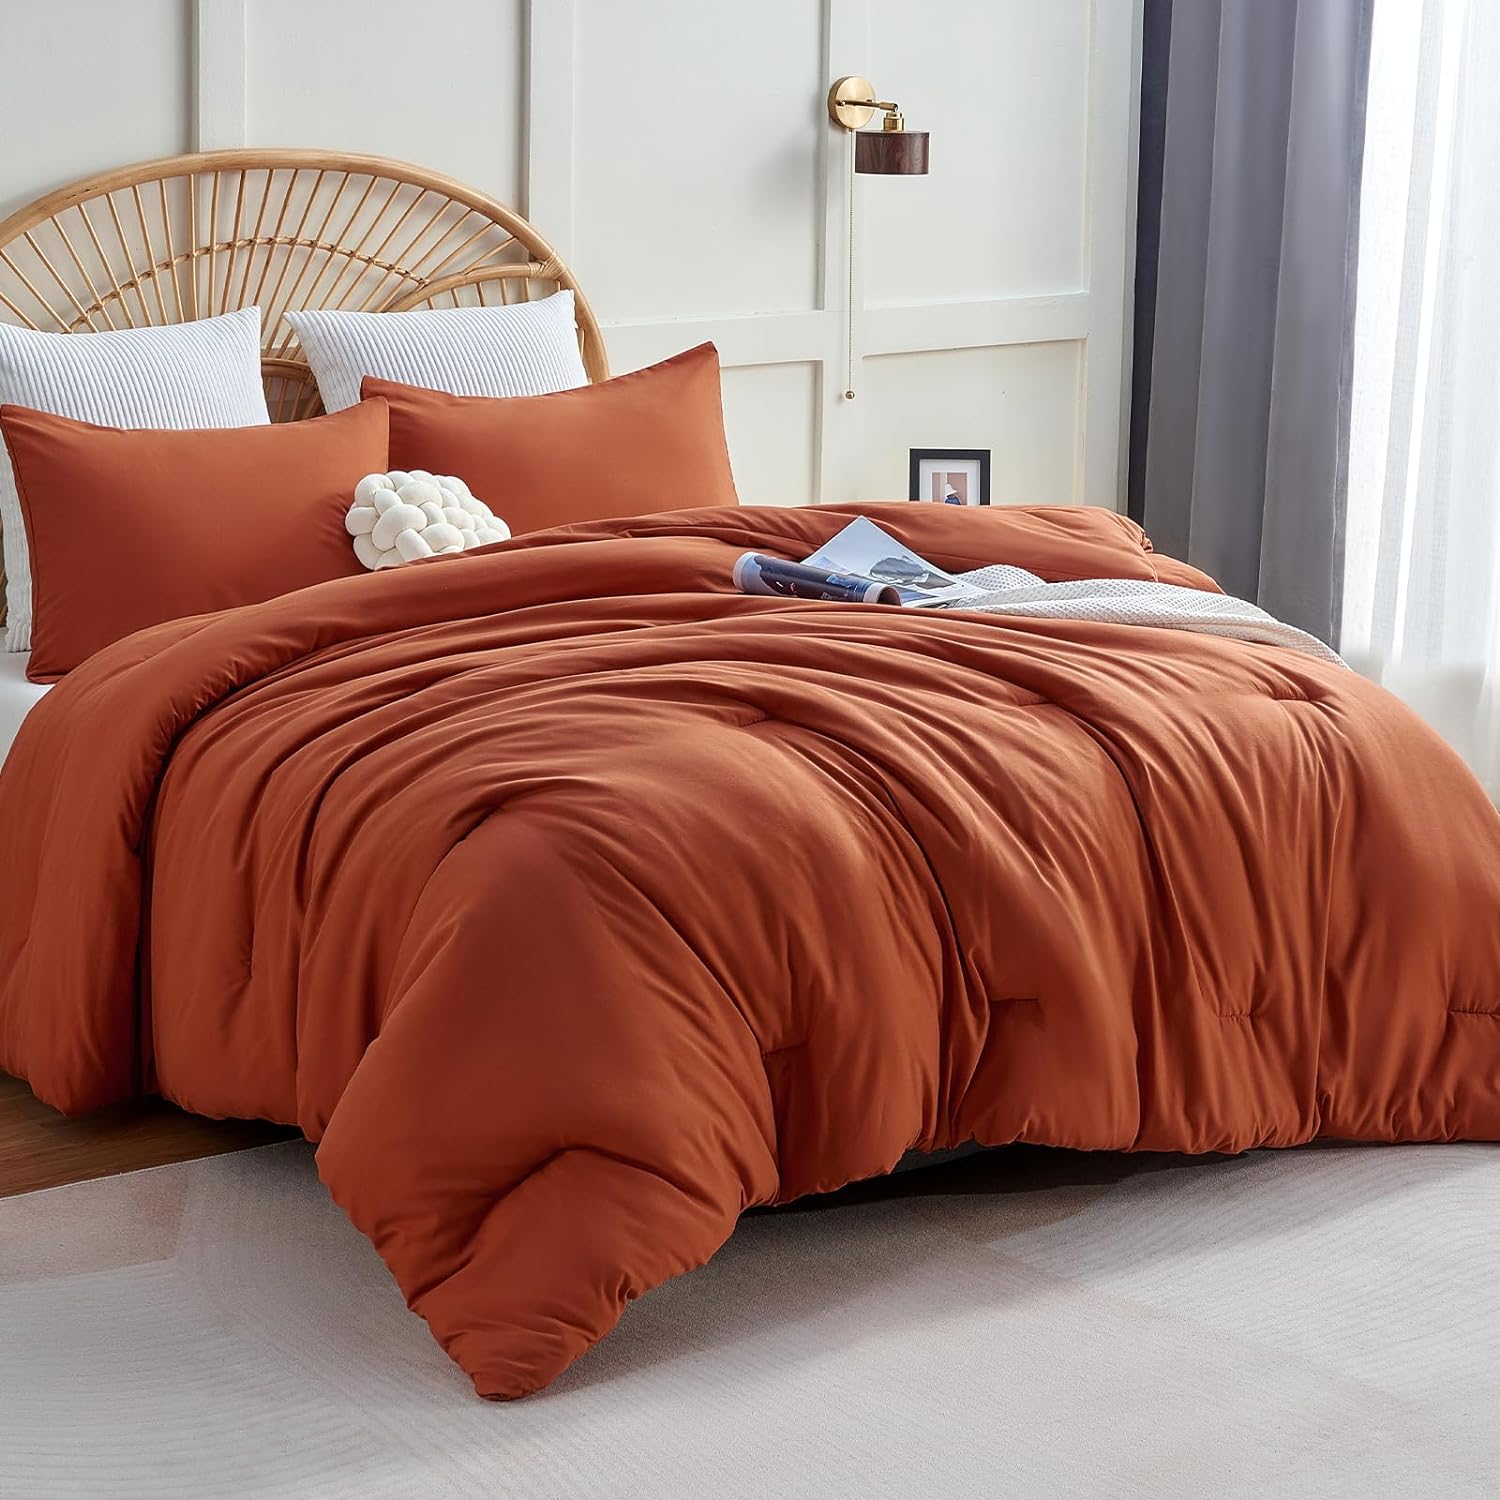 CozyLux Terracotta Comforter Set Queen Size, 3 Pieces Solid Burnt Orange Breathable Quilted Style Bedding Sets, Rust Luxury Fluffy Soft Microfiber Comforter for All Season(1 Comforter & 2 Pillowcases)